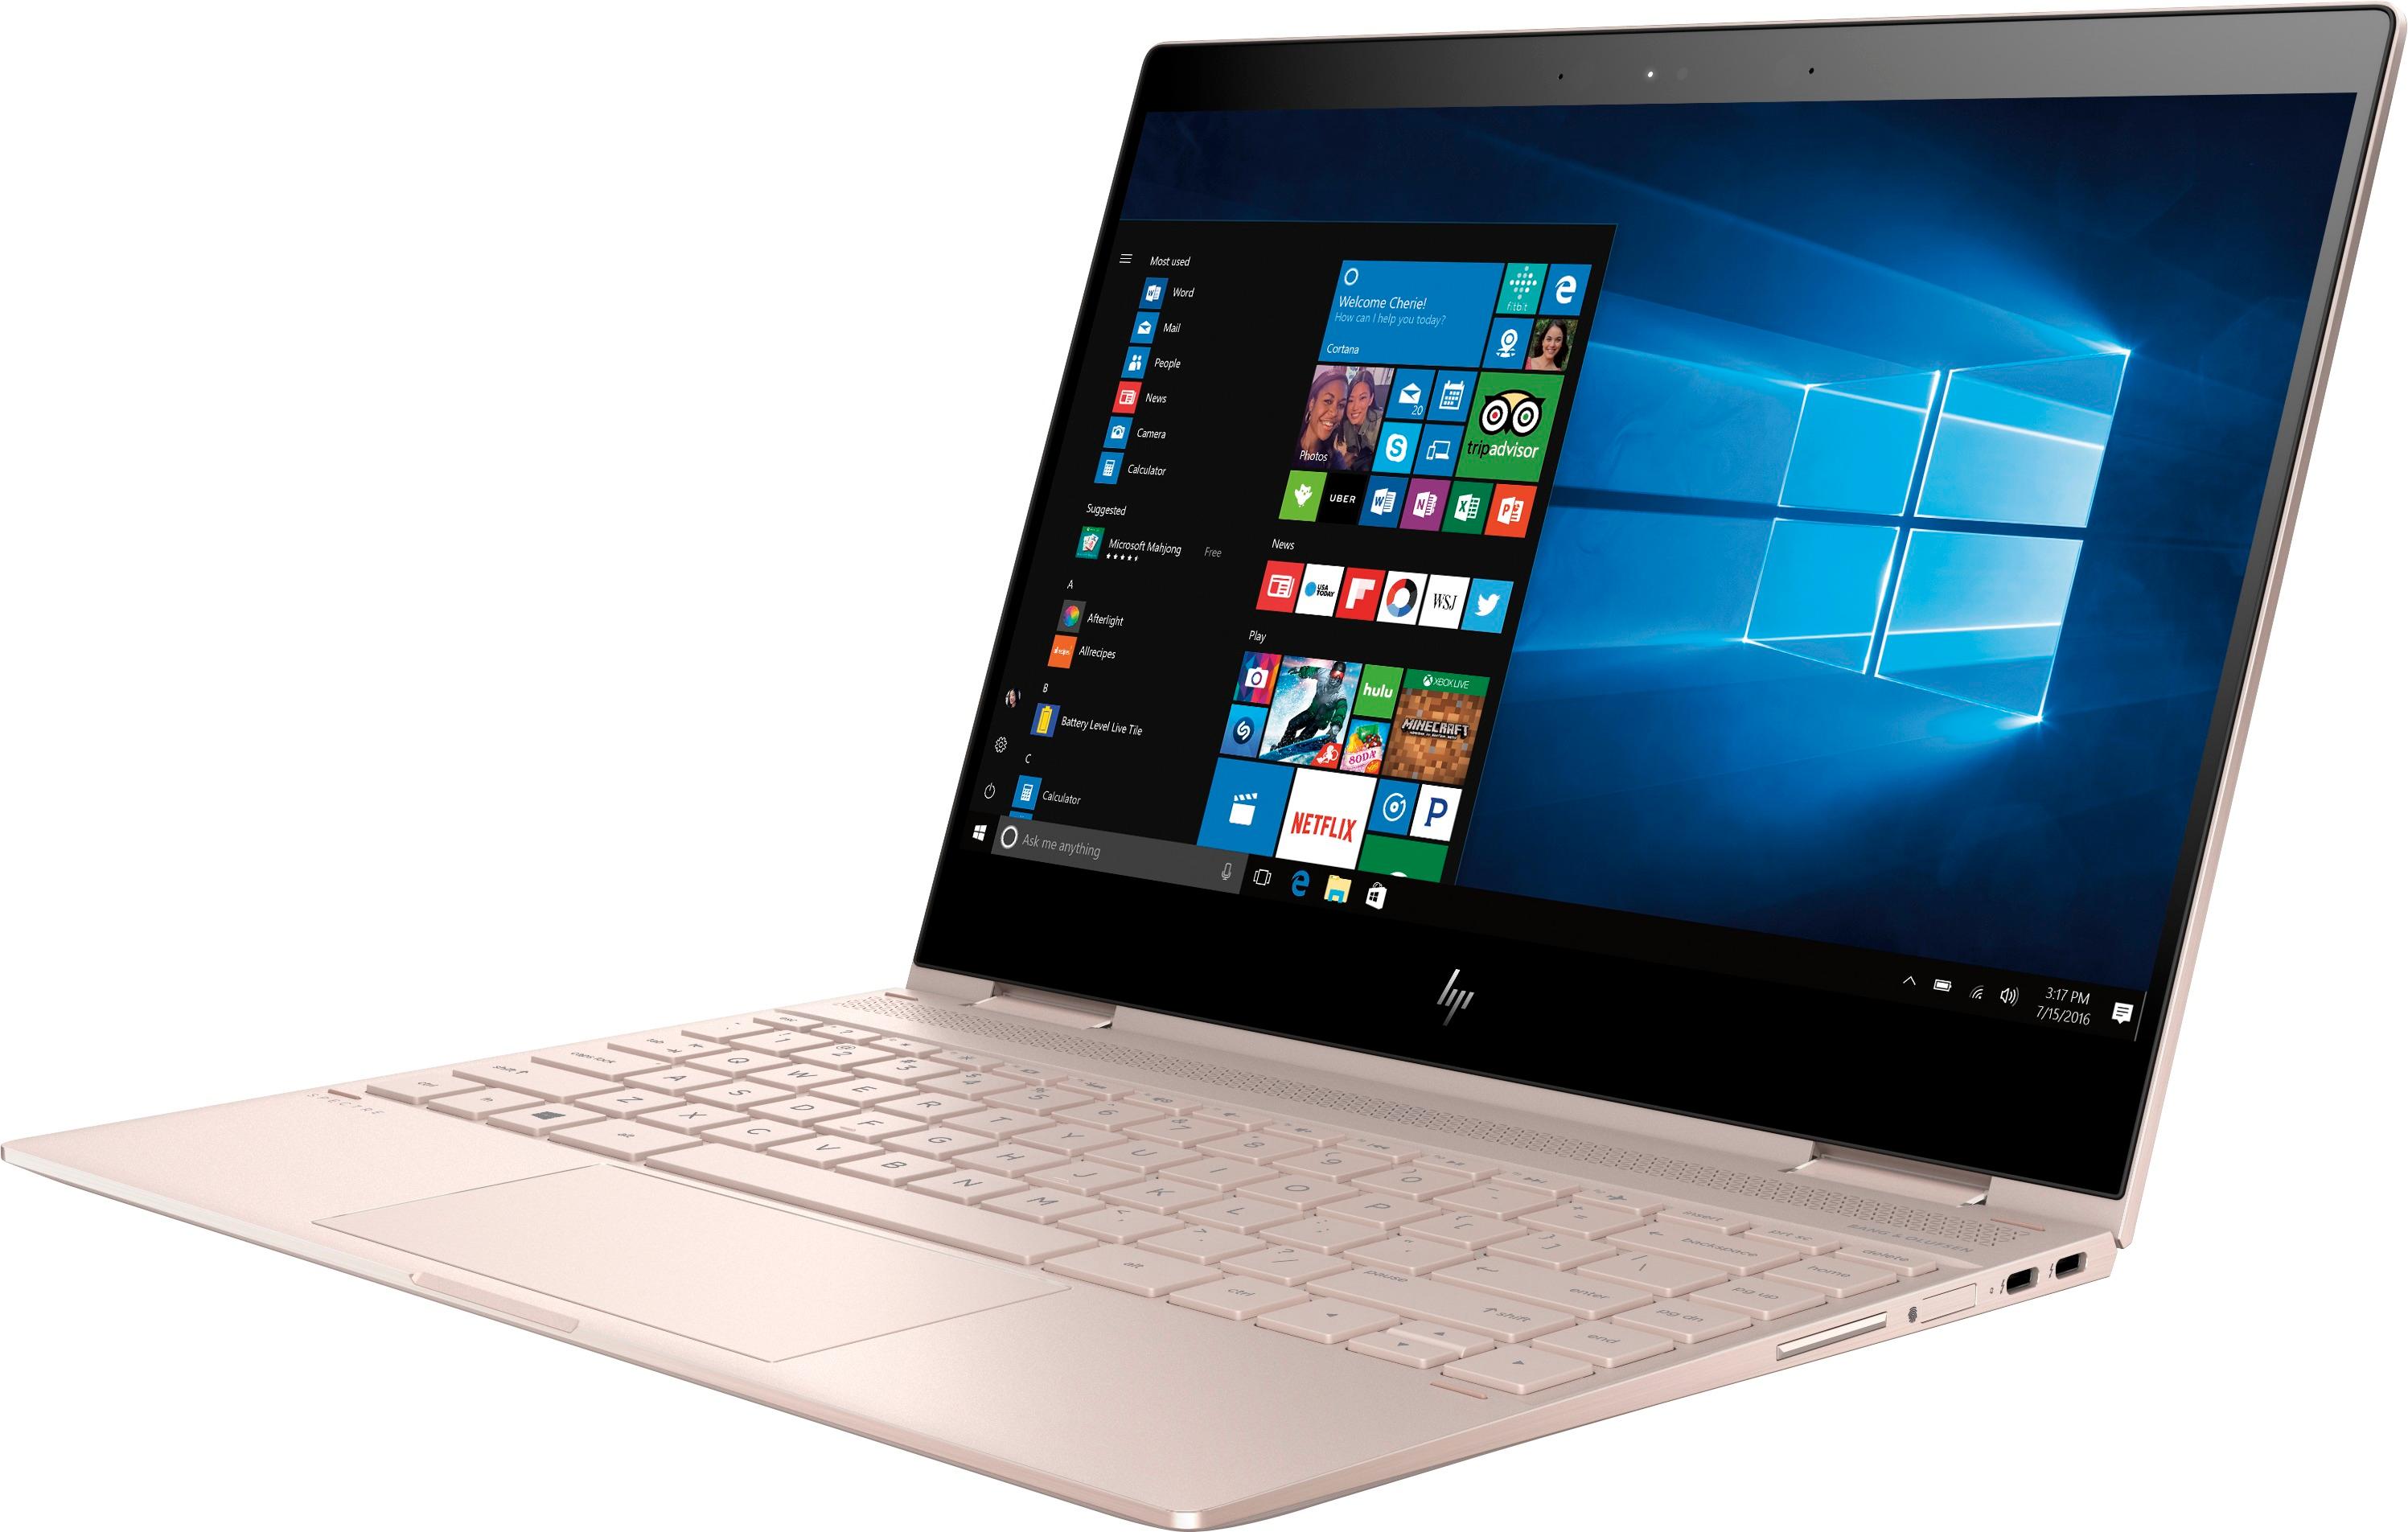 Best Buy: Spectre x 2 in .3" Touch Screen Laptop Intel Core i7 GB  Memory GB Solid State Drive HP finish in pale rose gold 2LVUA#ABA